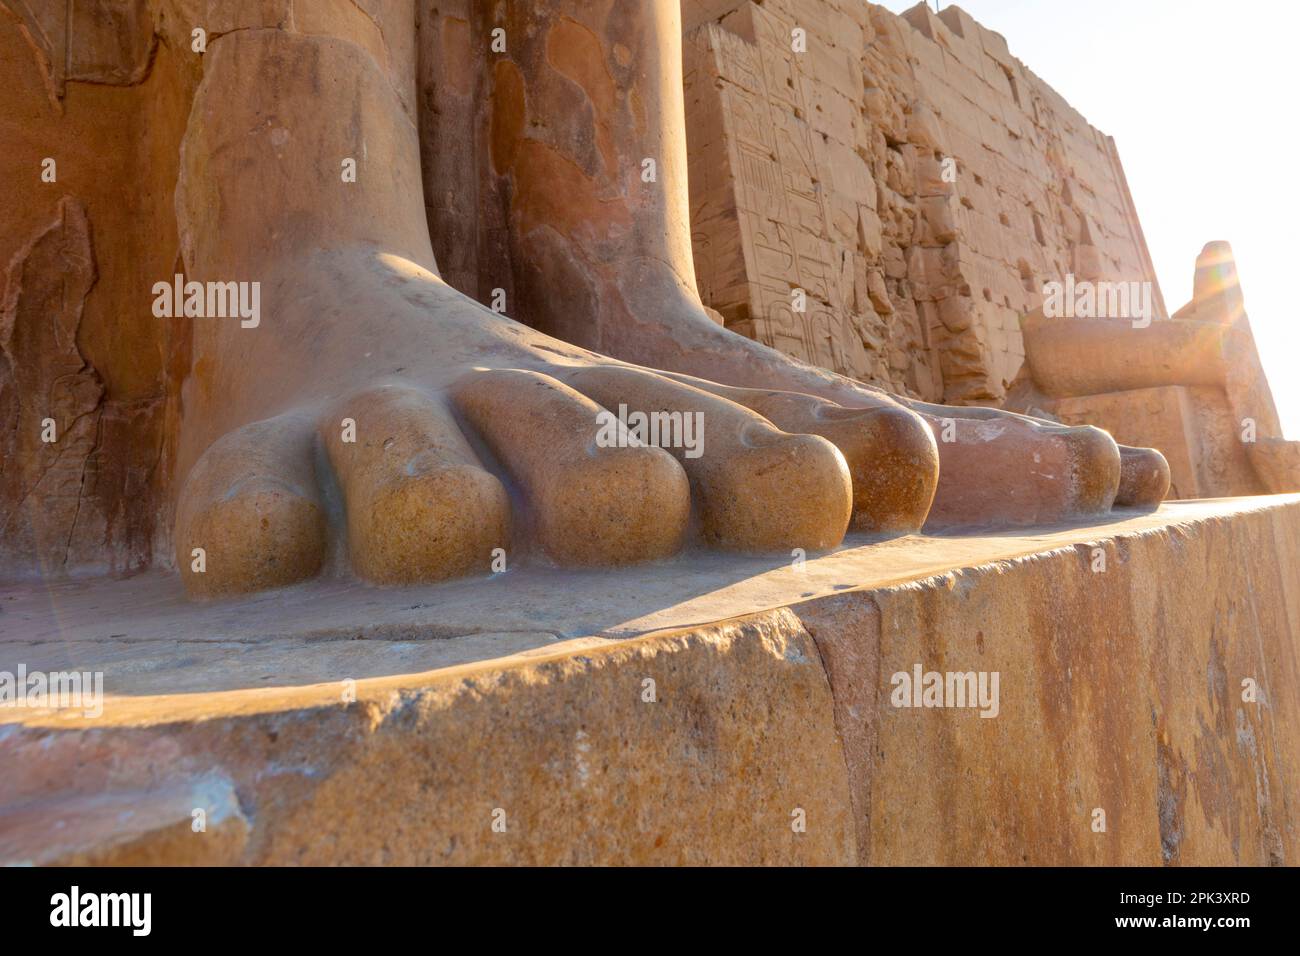 Foot of Statue at Karnak Temple, Luxor, Egypt, North East Africa Stock Photo